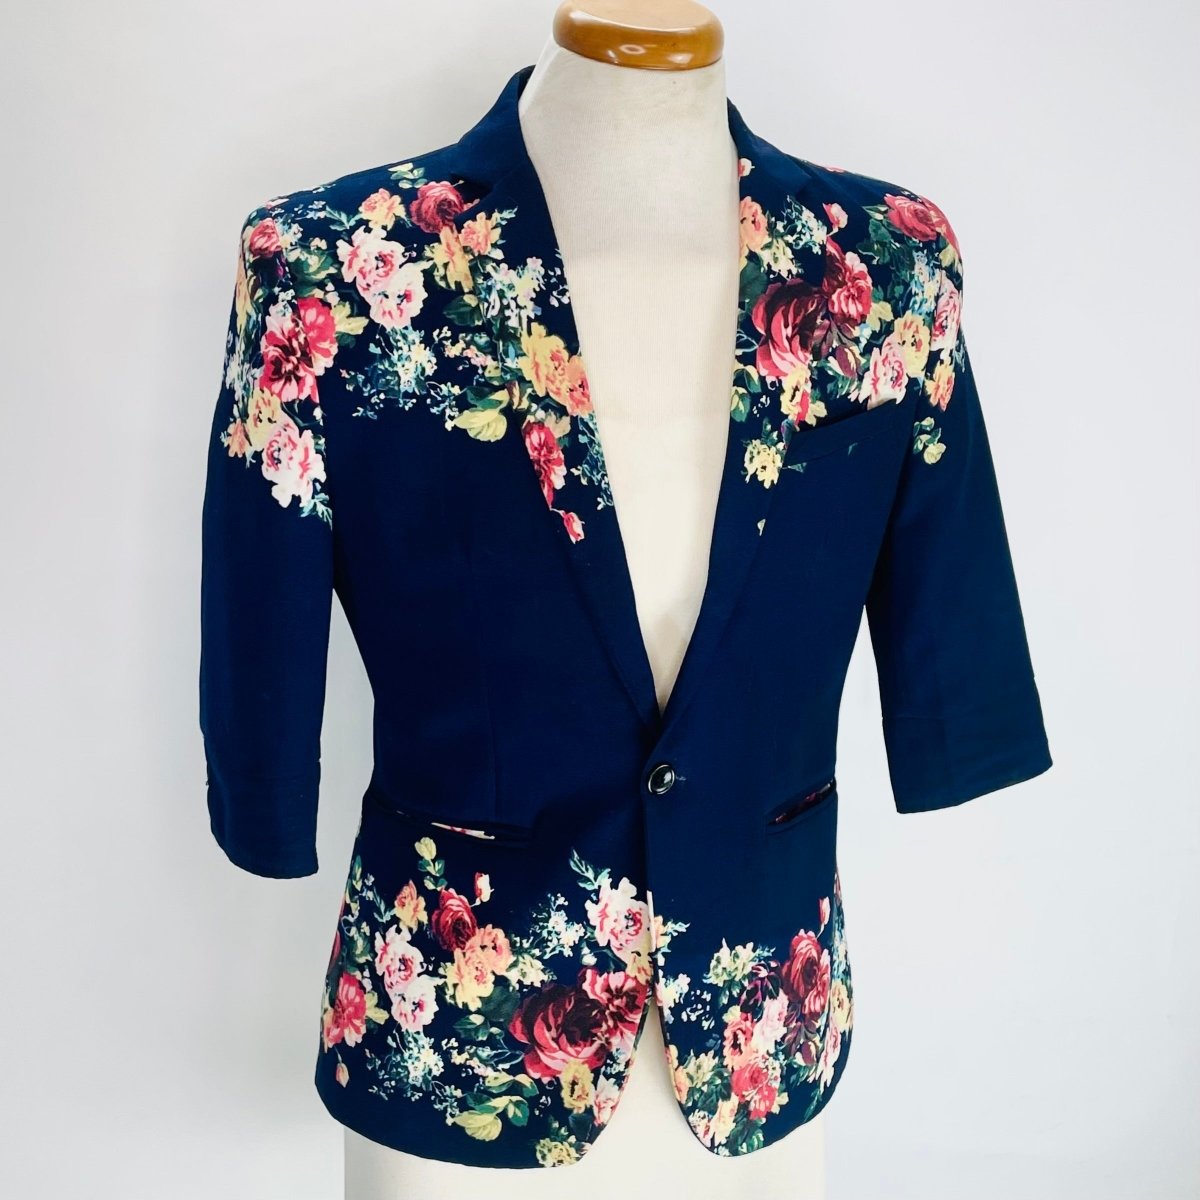 Floral Blazer Jacket with ¾ Length Sleeves - Hart & Hive